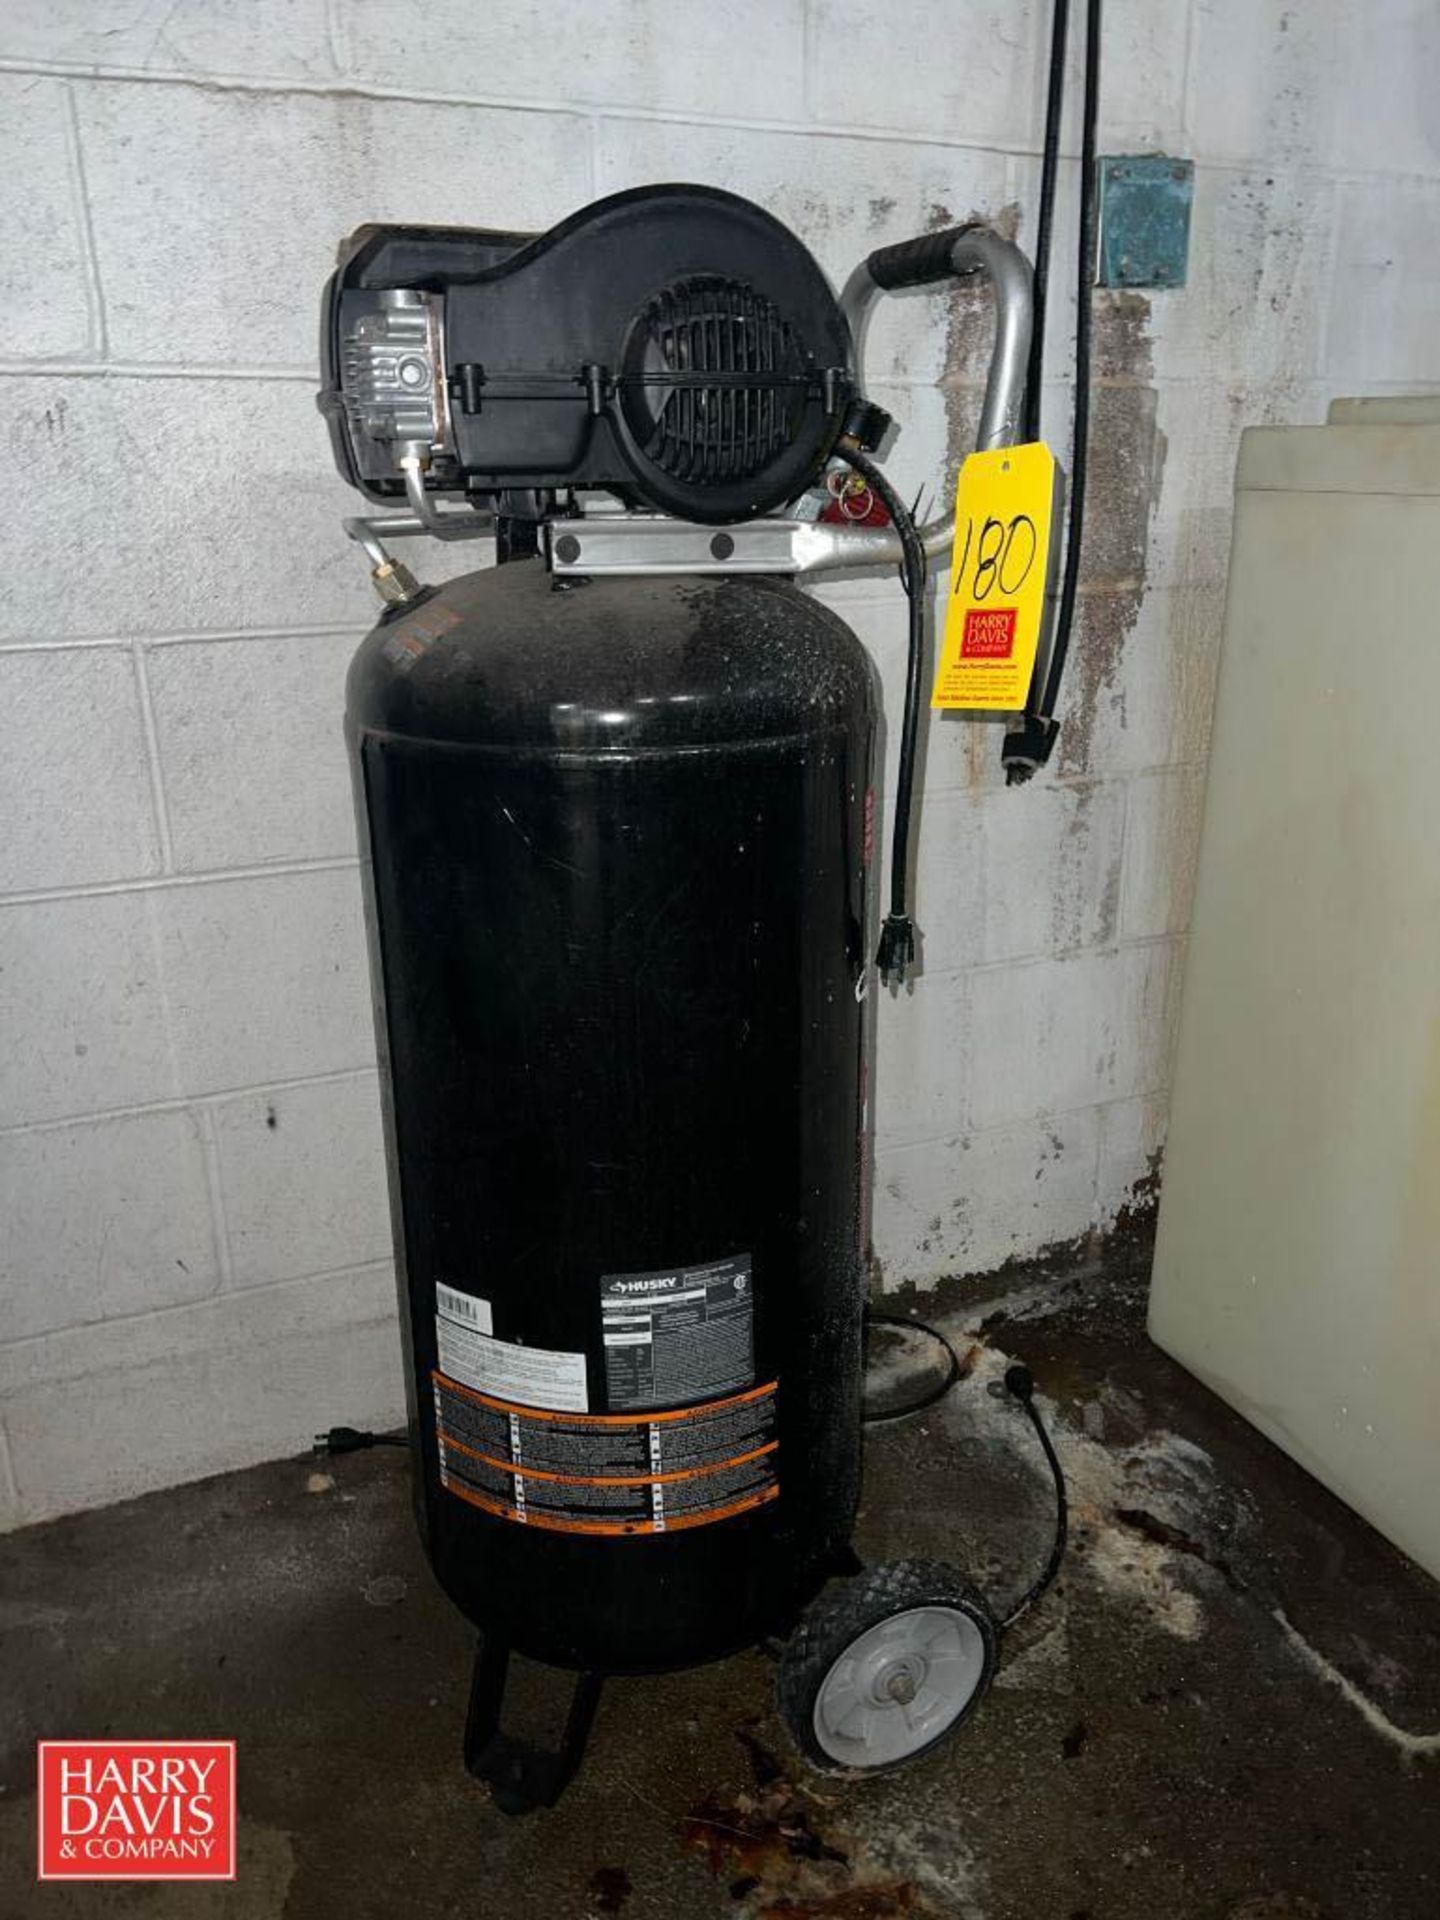 Husky 200 PSI, 1.3 HP Air Compressor, Model: C202H with 20 Gallon Tank - Rigging Fee: $75 - Image 2 of 2